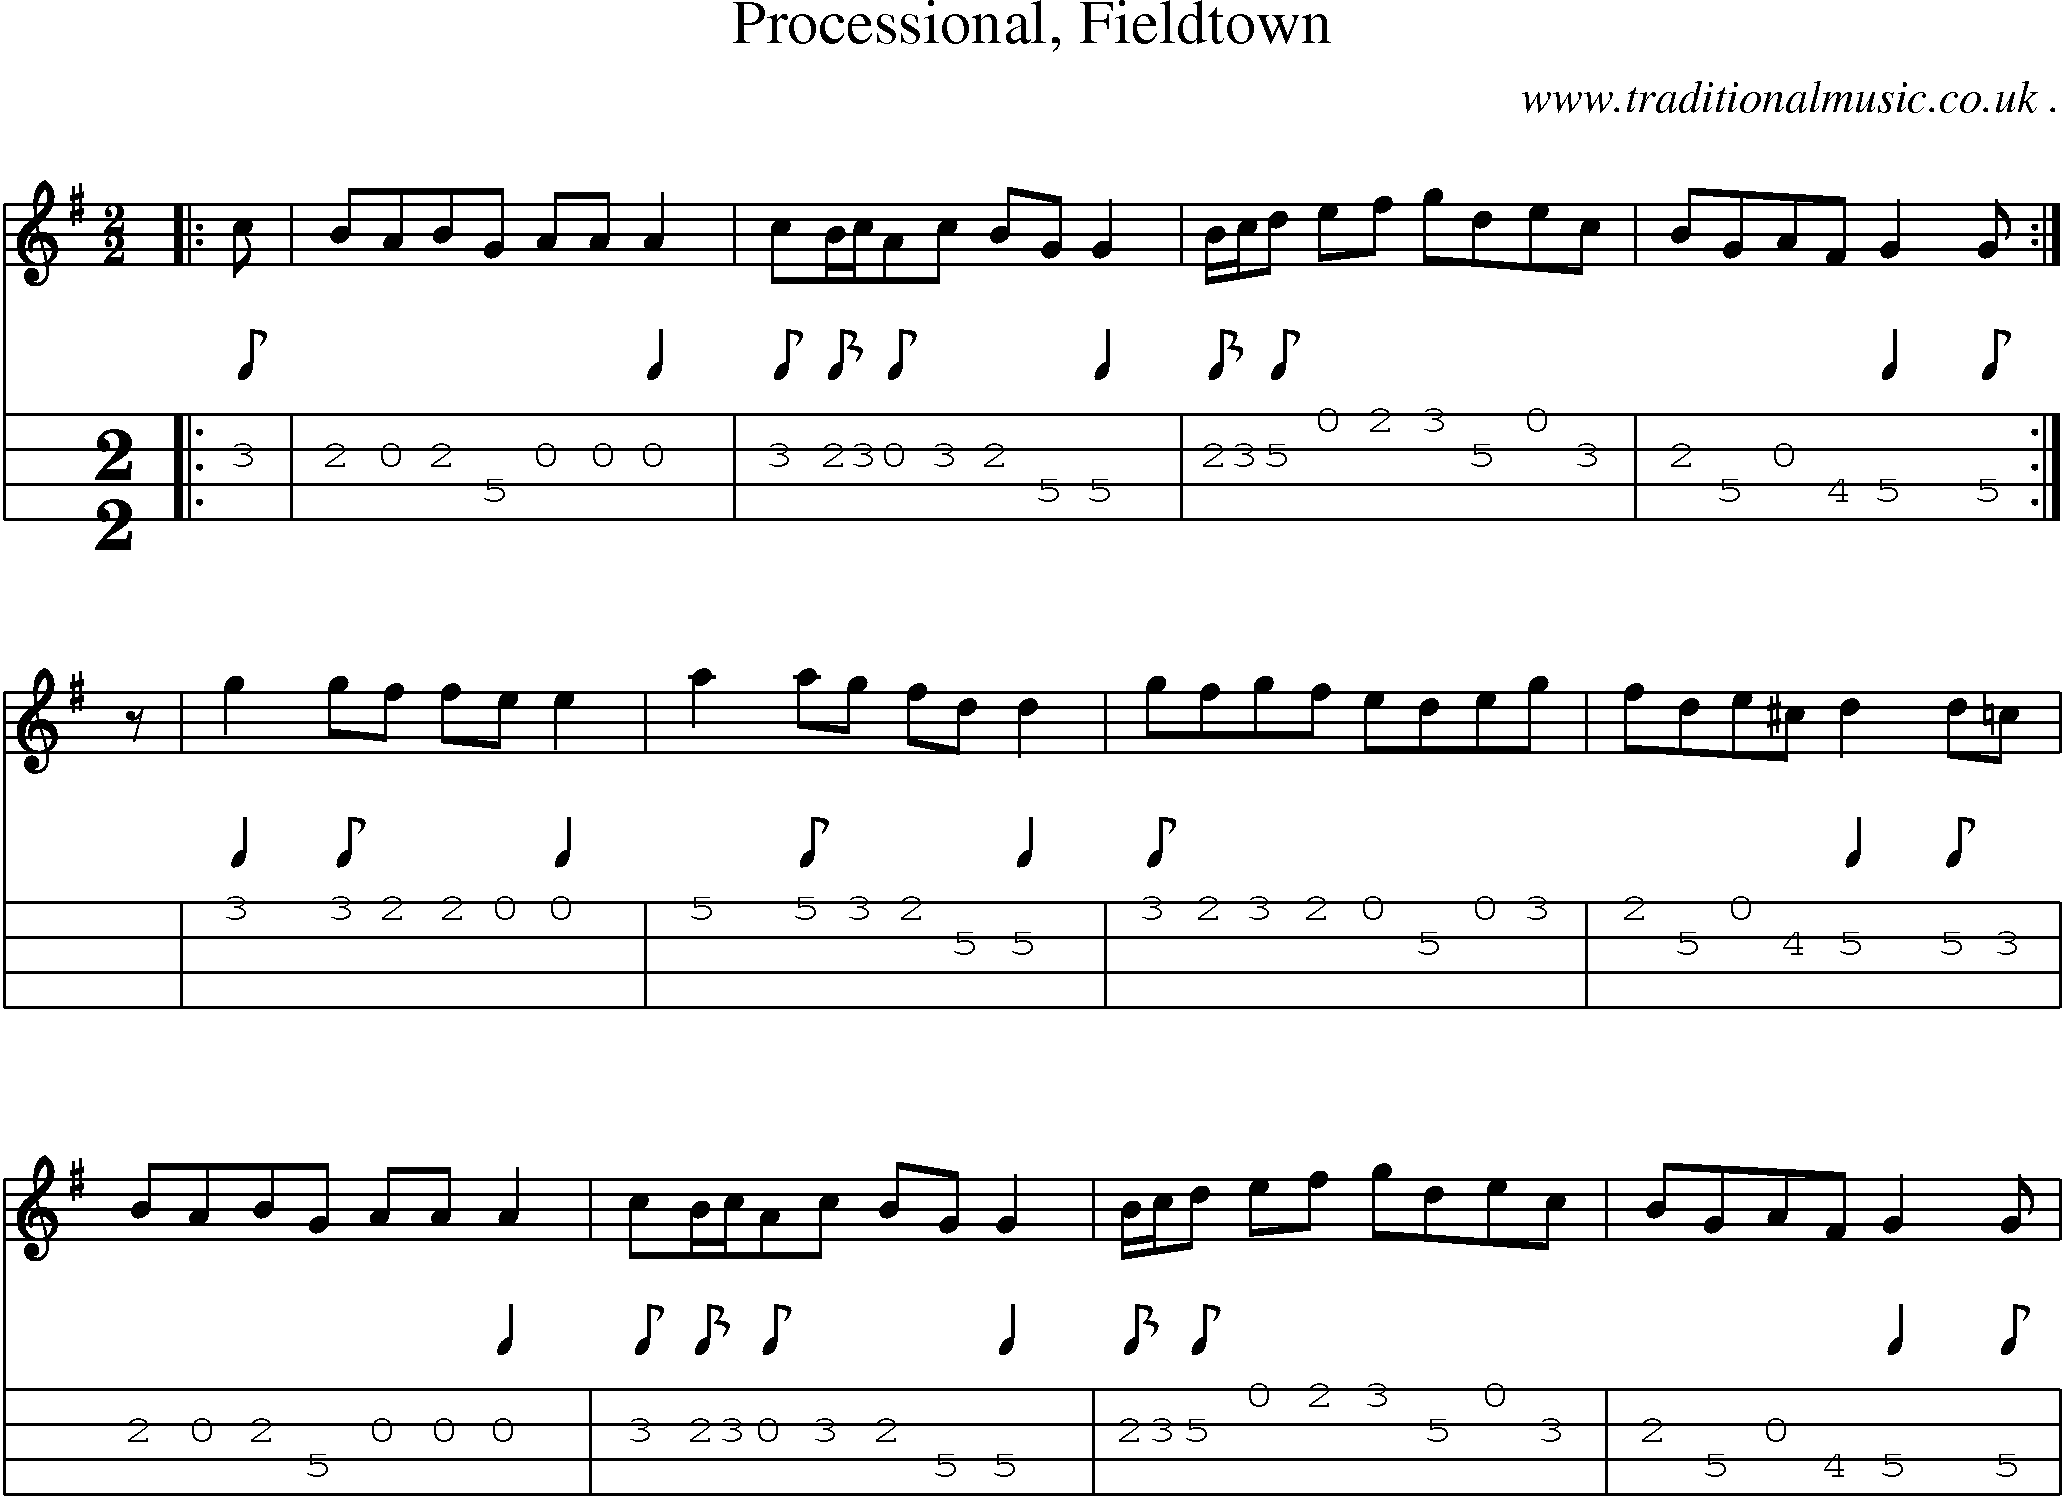 Sheet-Music and Mandolin Tabs for Processional Fieldtown